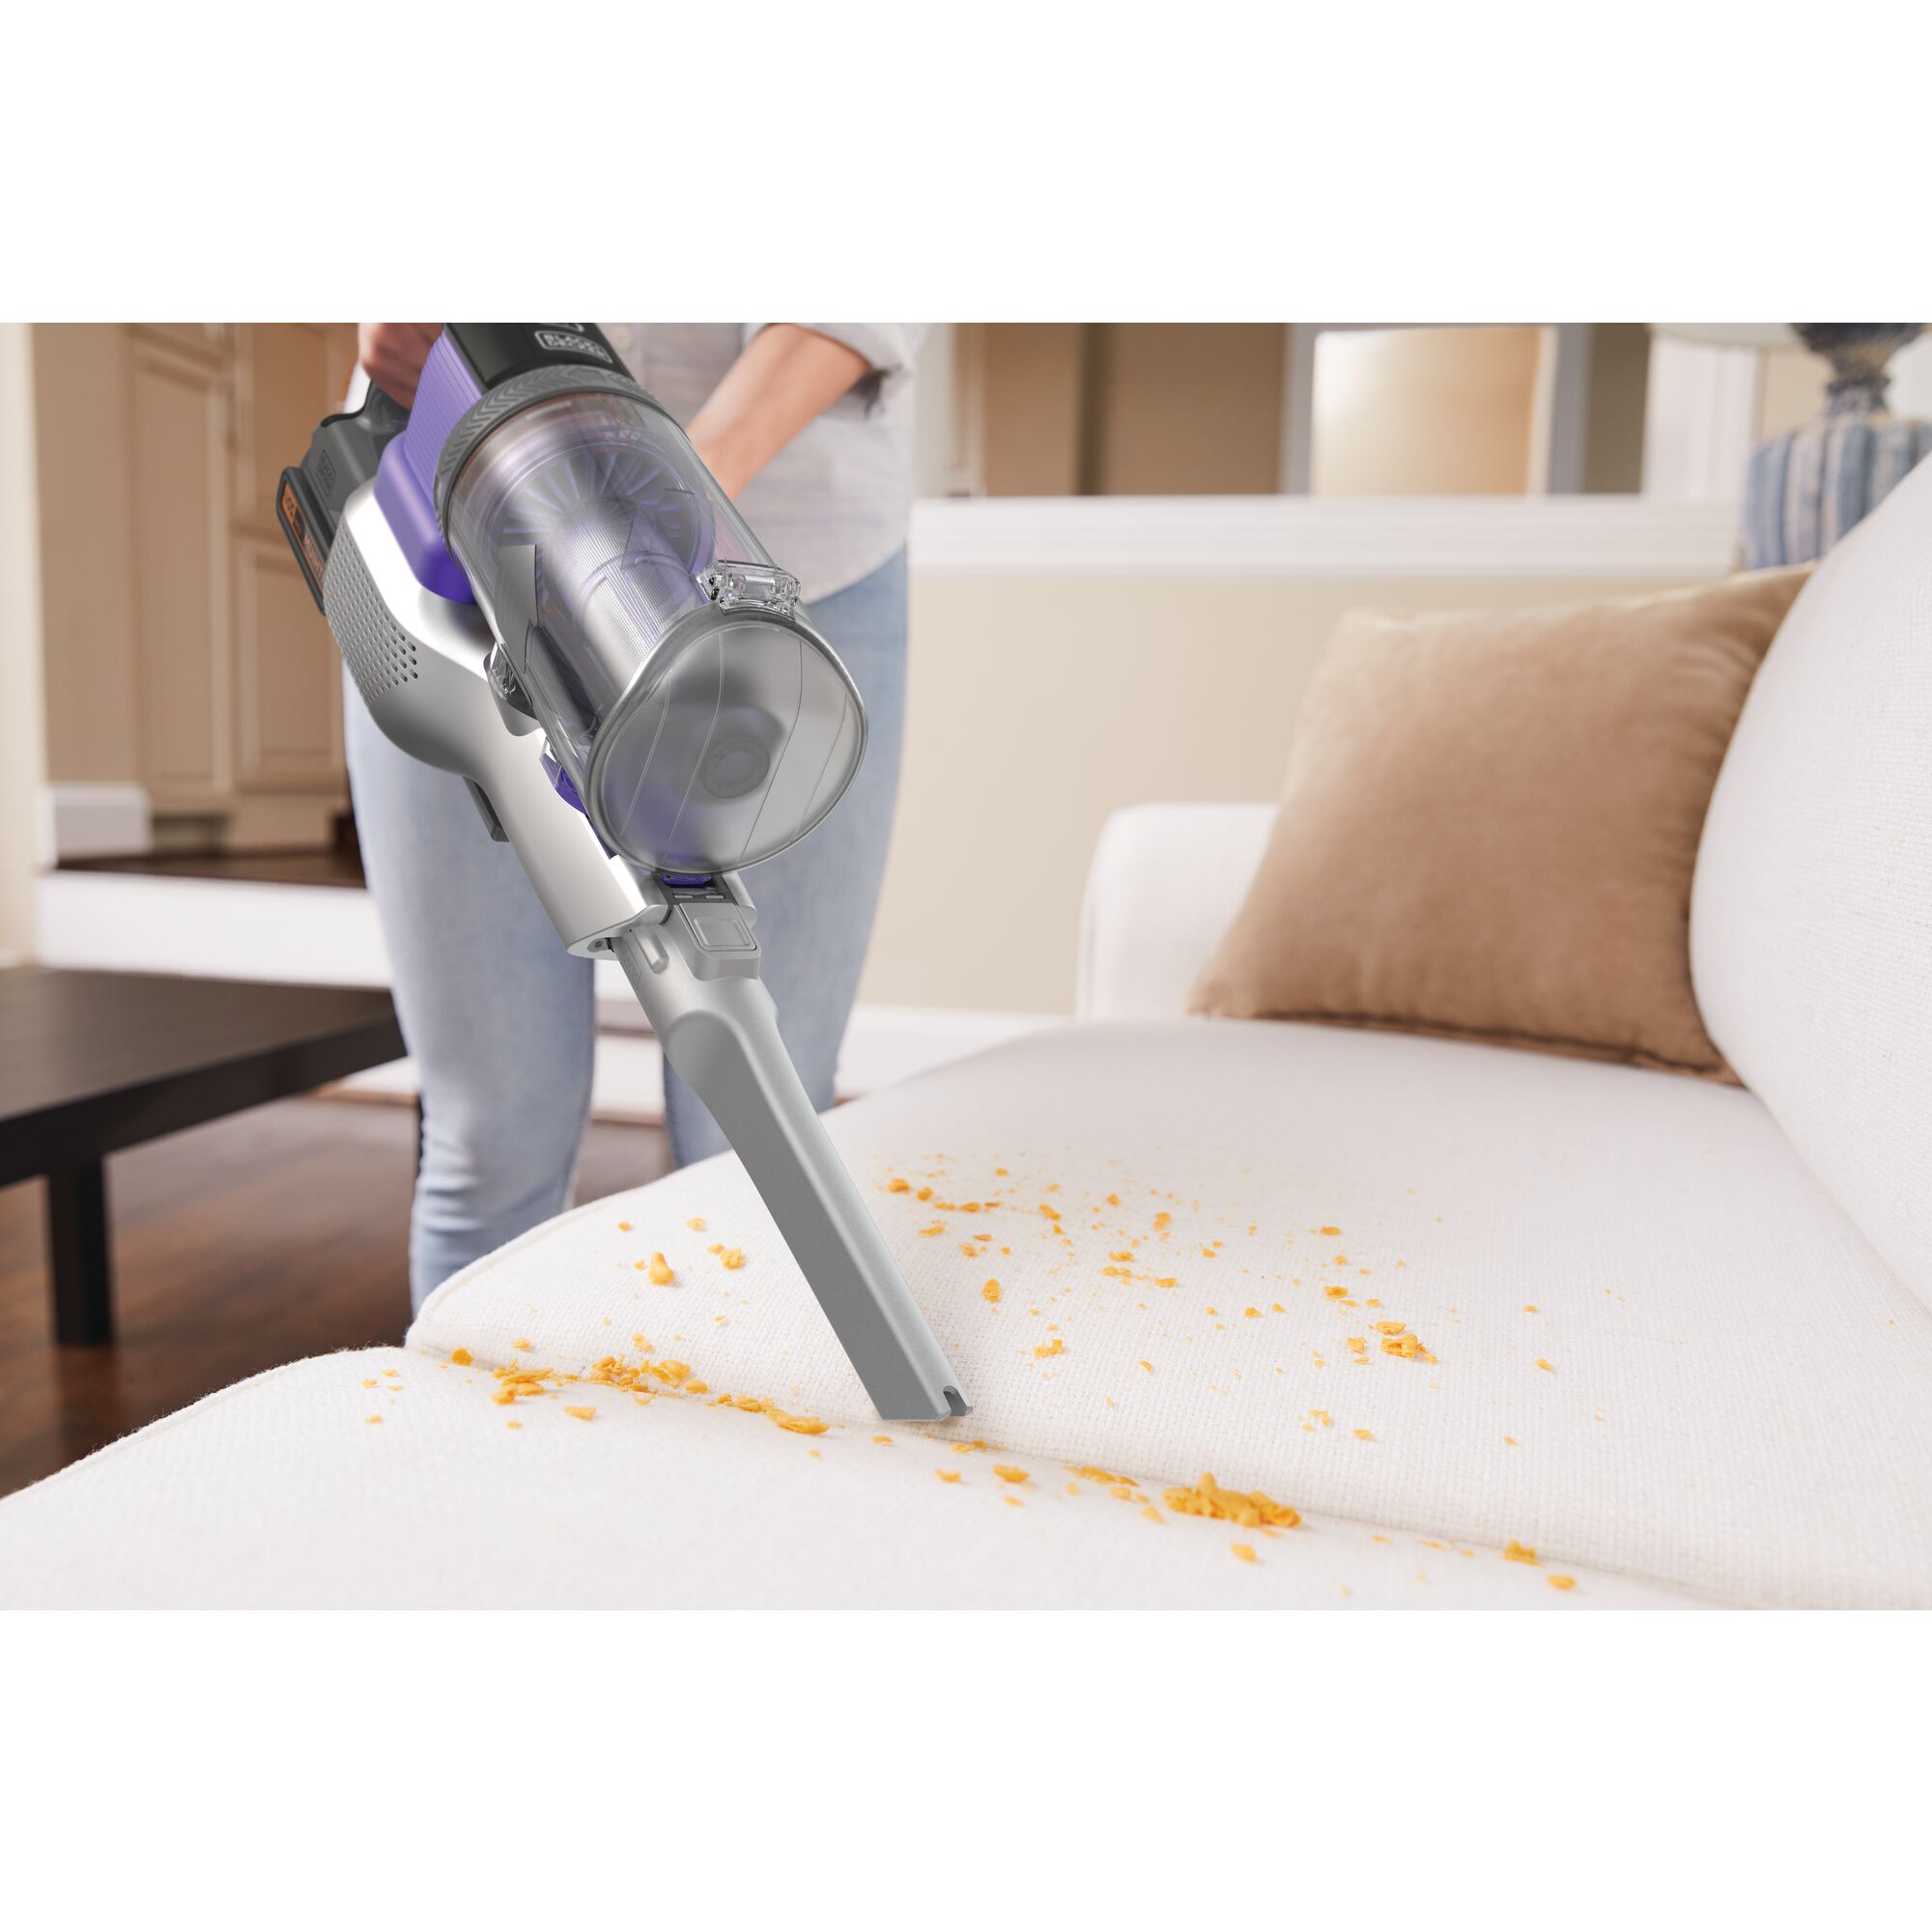 power series extreme pet cordless stick vacuum cleaner being used clean spilled material from a couch.